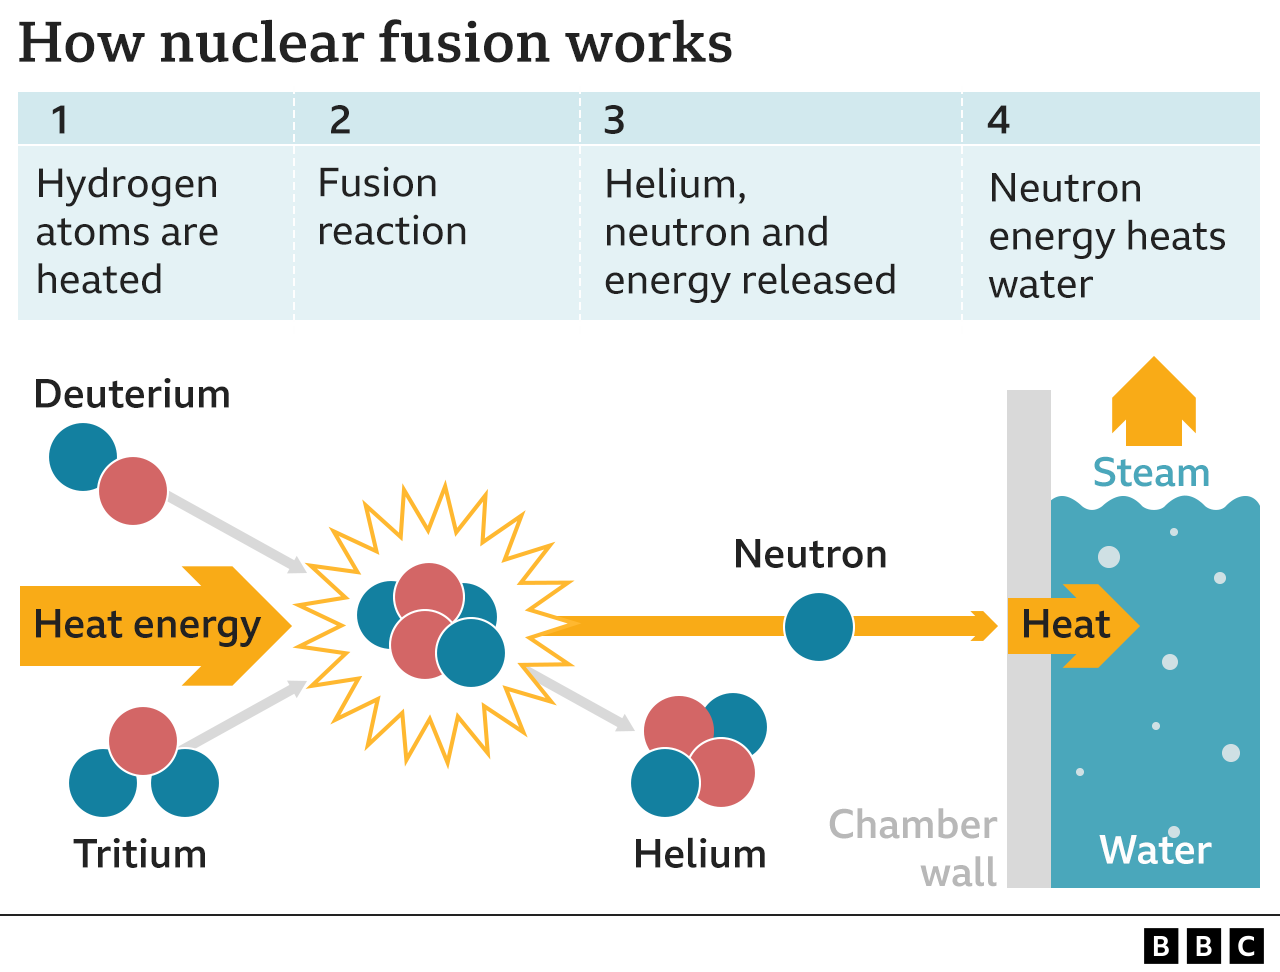 Breakthrough on nuclear fusion energy: Carbon-free future